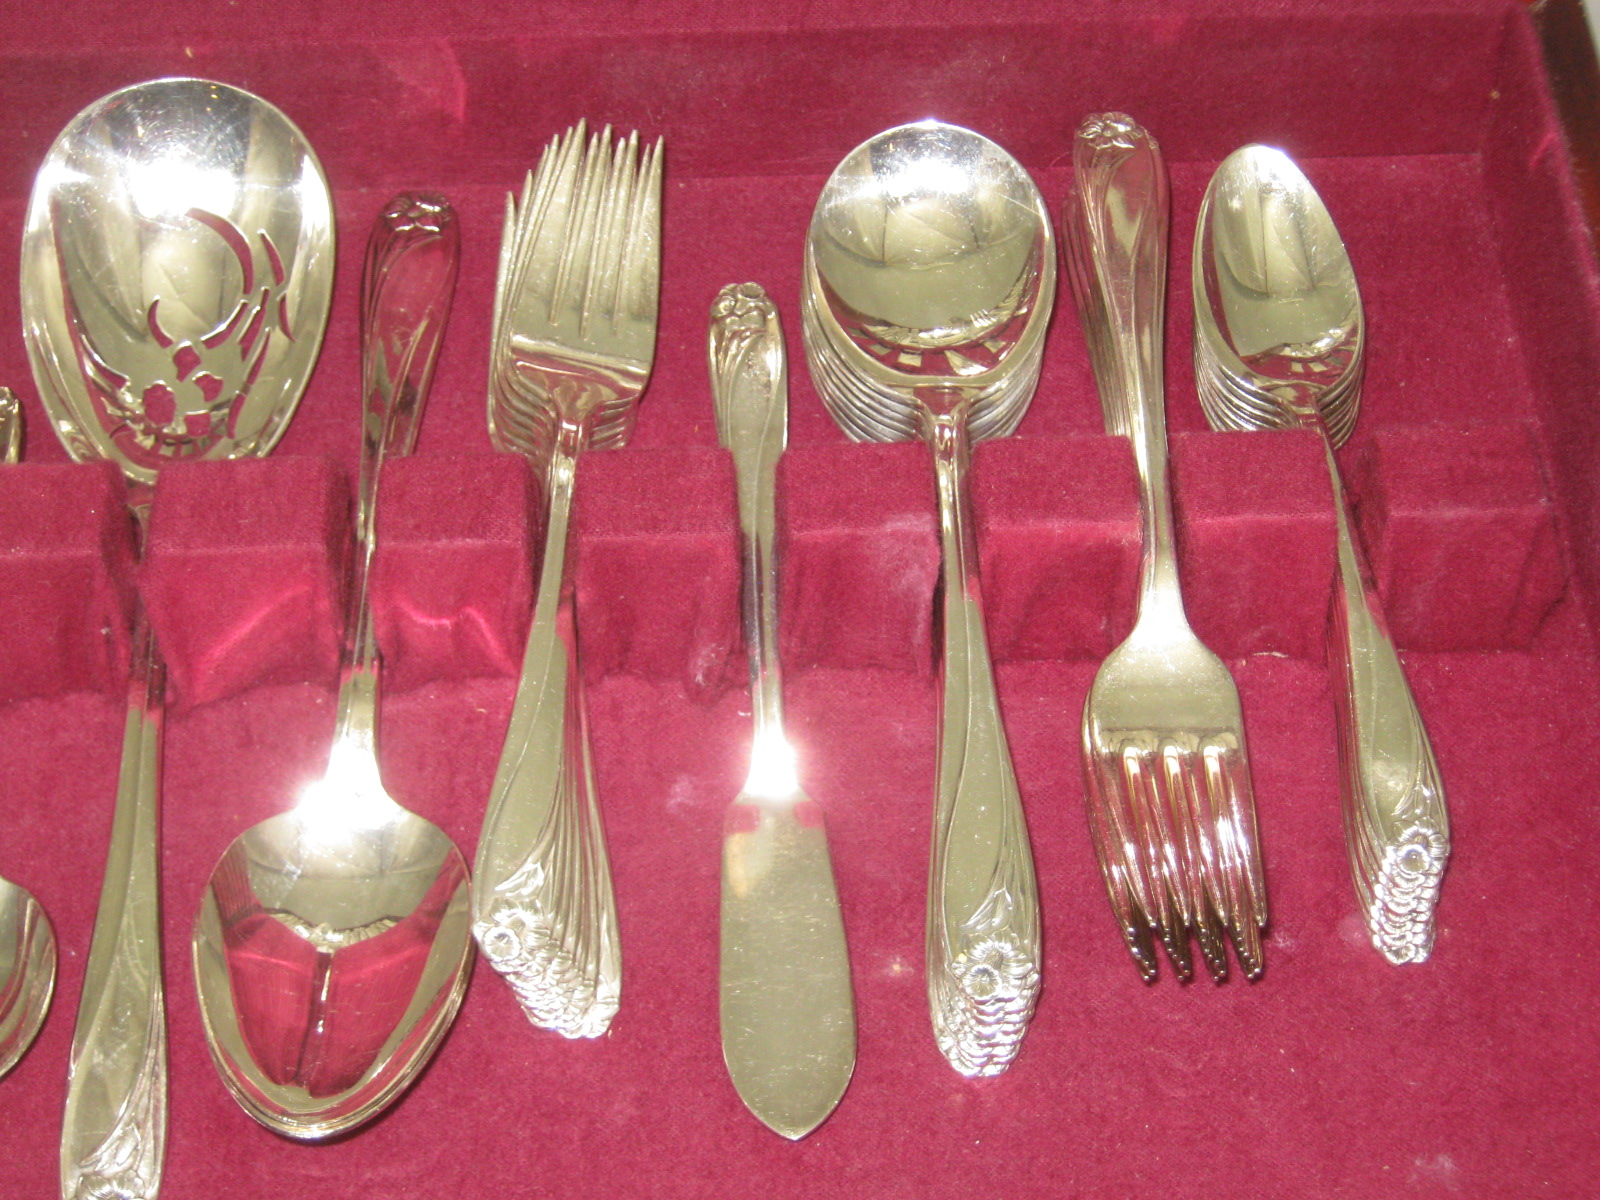 57 Pc 1847 Rogers Bros IS Daffodil Pattern Flatware Service For 8 + Wooden Chest 2